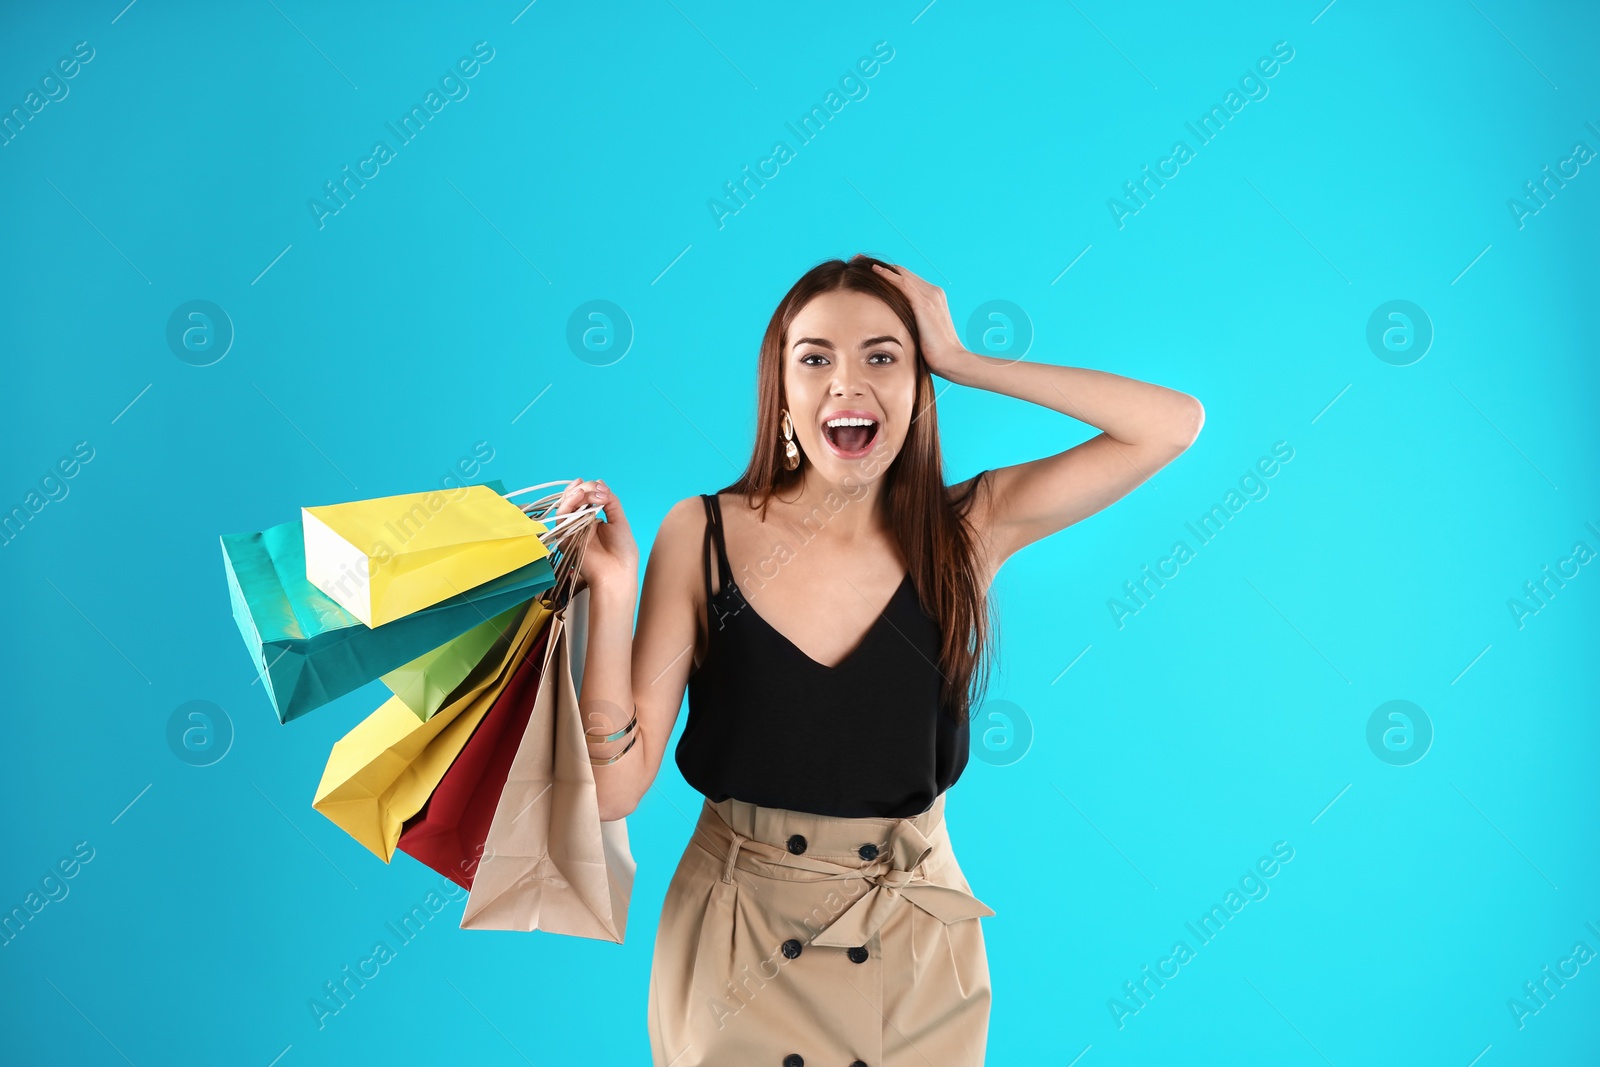 Photo of Young woman with shopping bags on color background